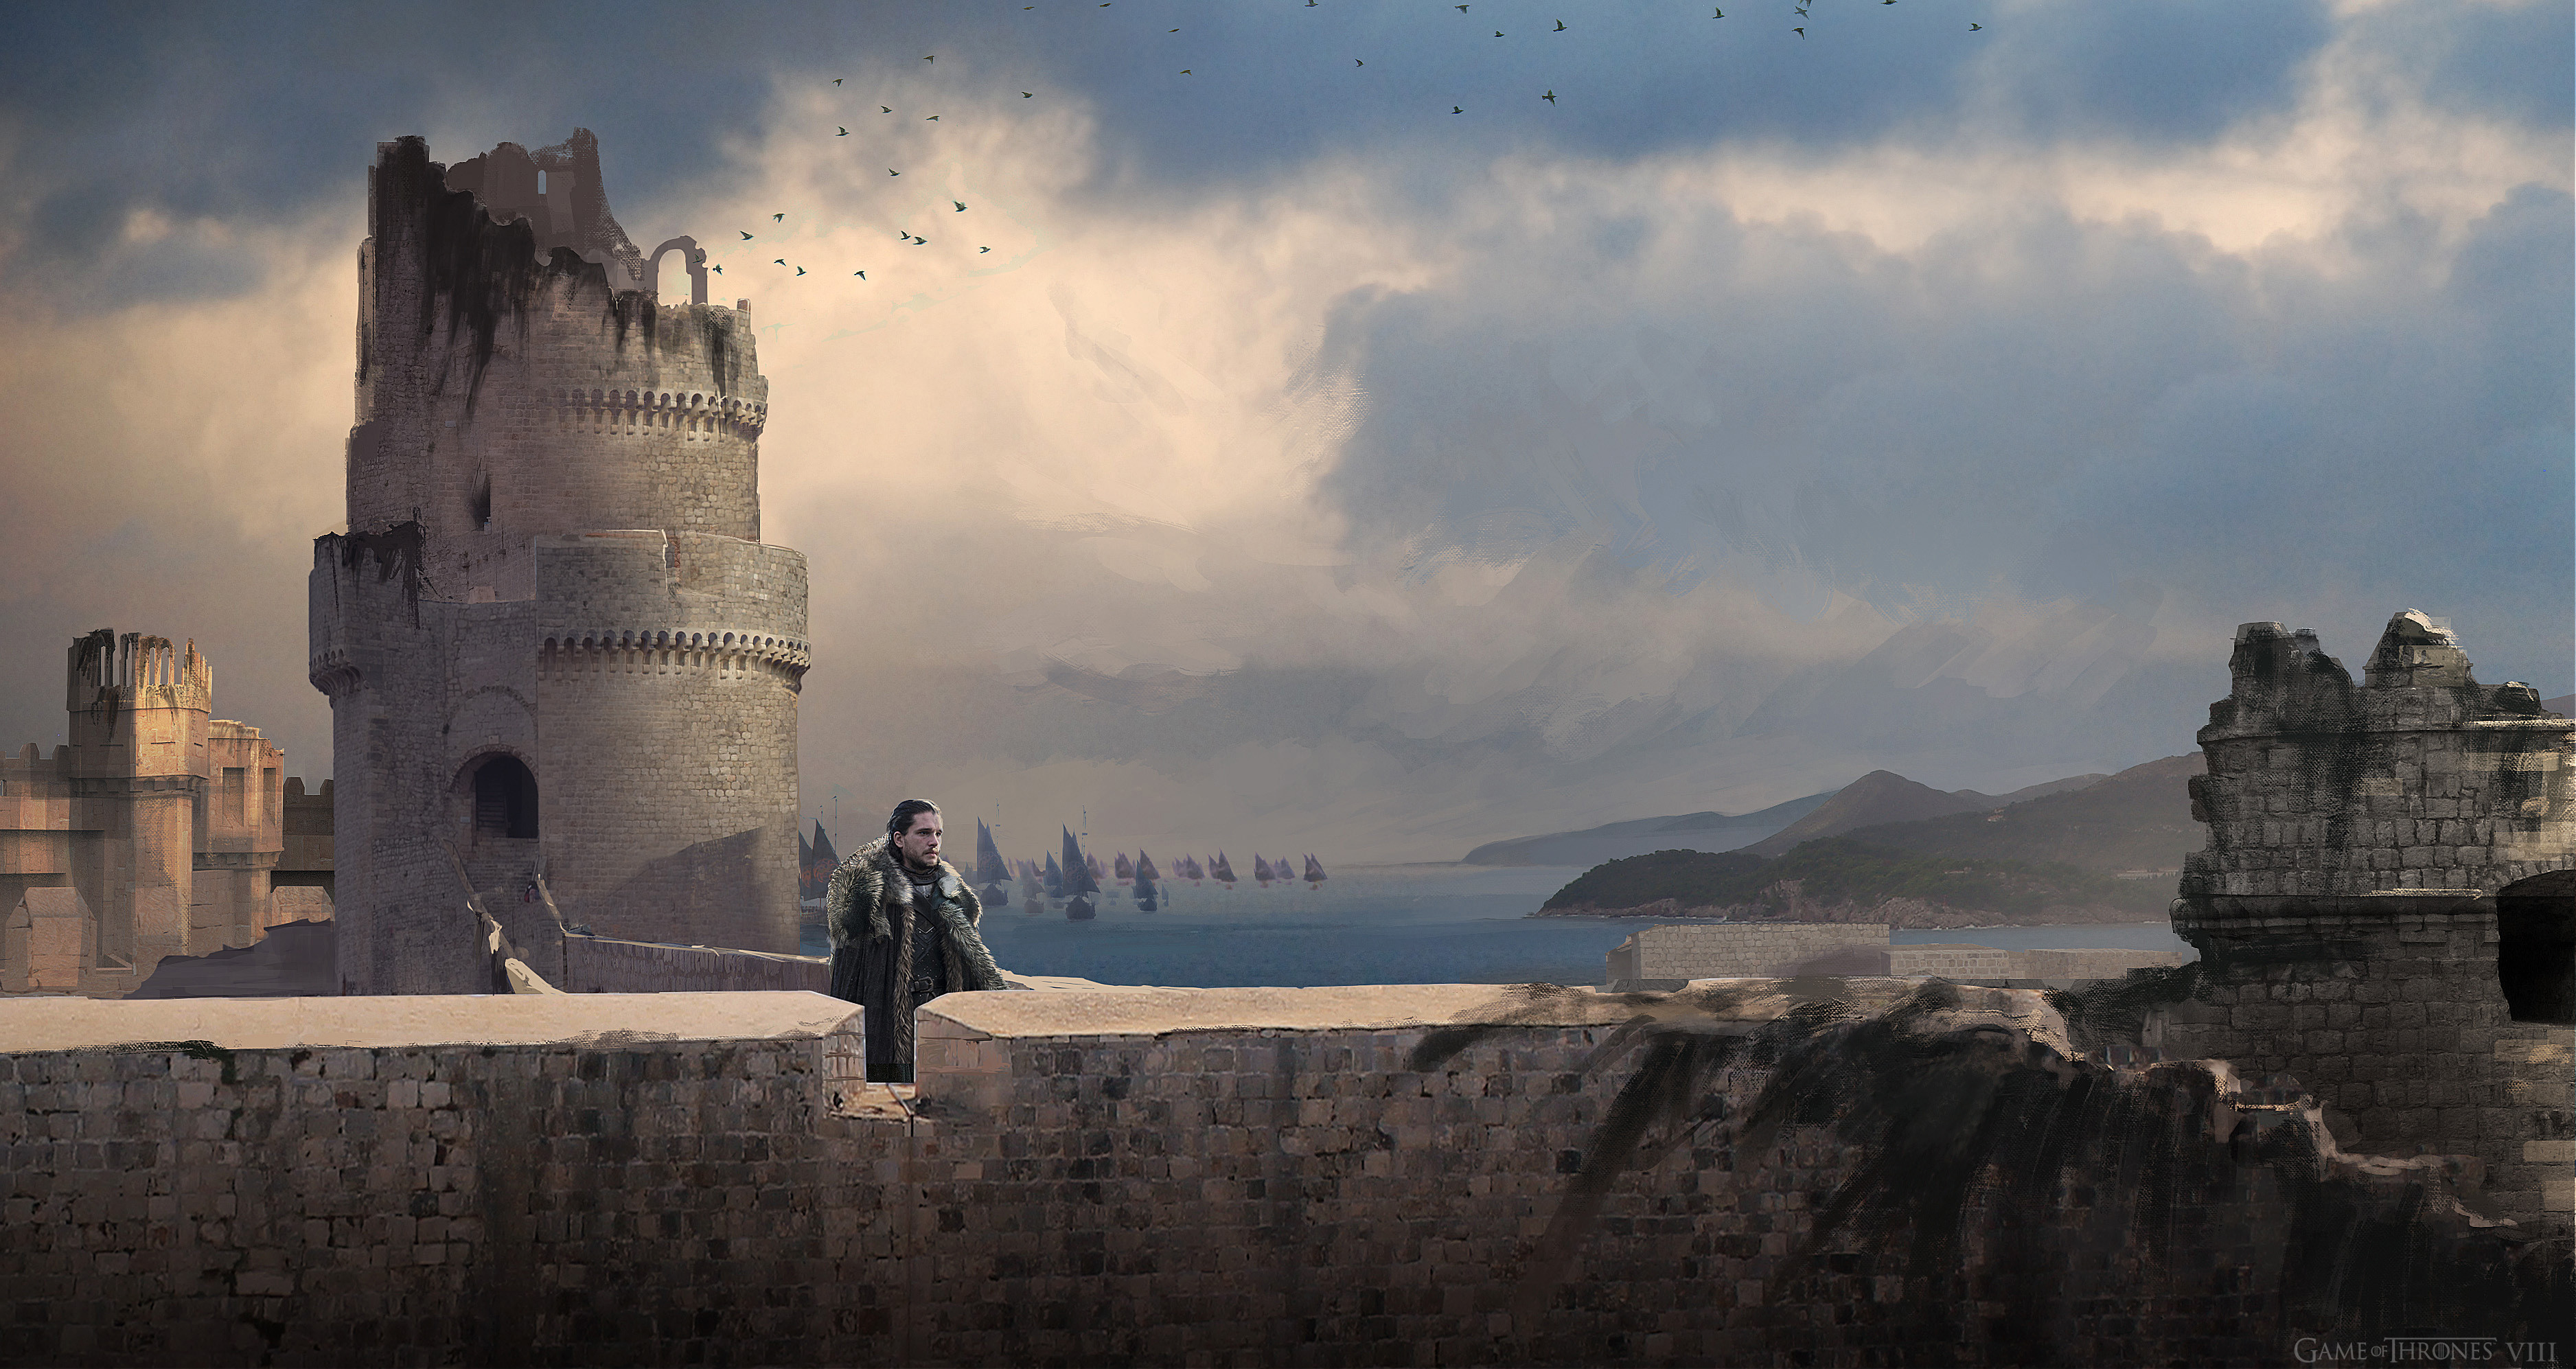 Jon is released towards the end of the episode and looks out across the docks at Kingslanding